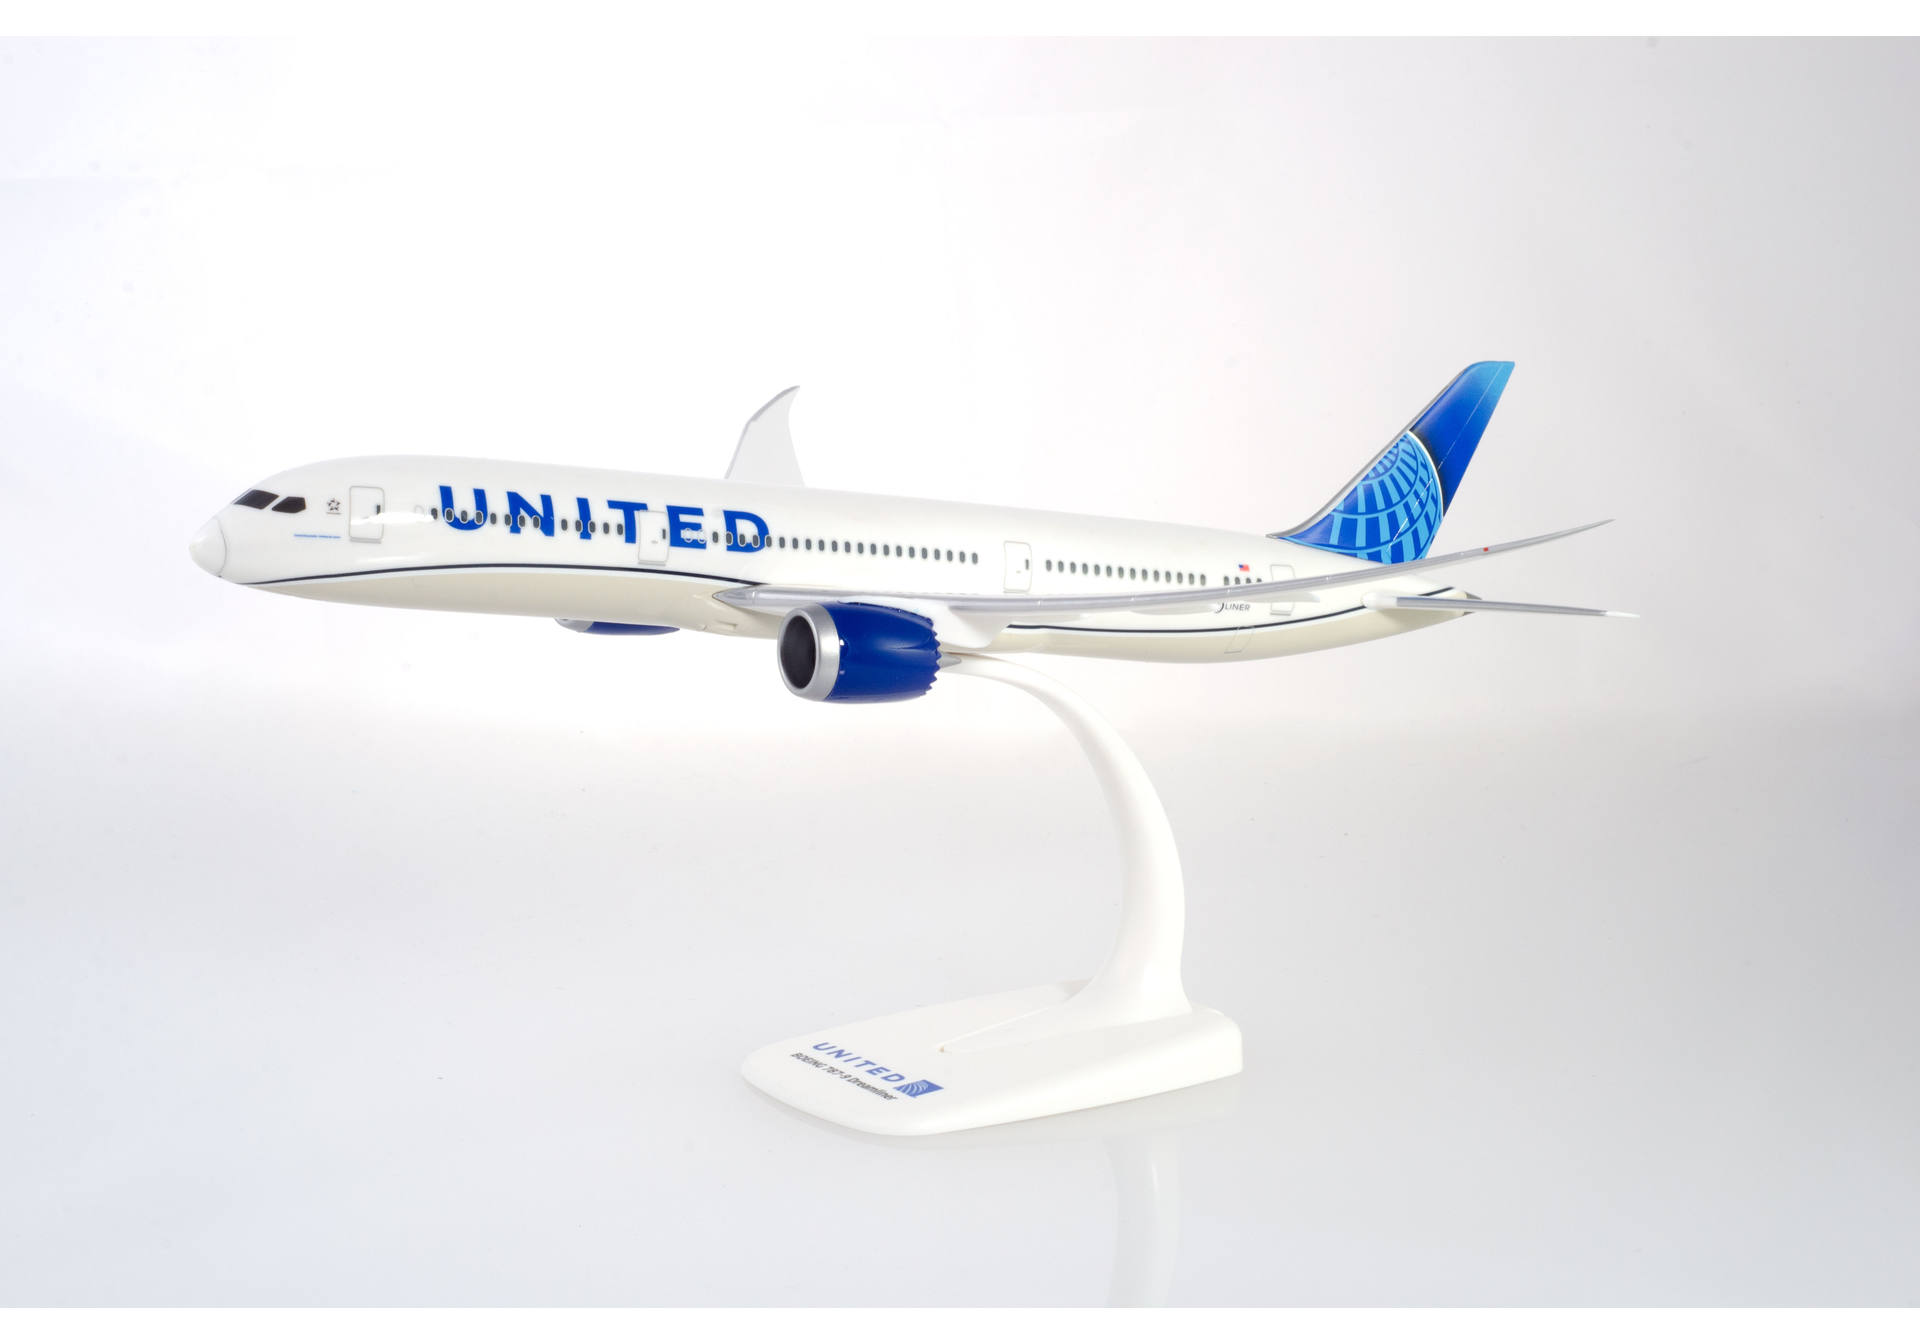 United Airlines Boeing 787-9 Dreamliner - new colors